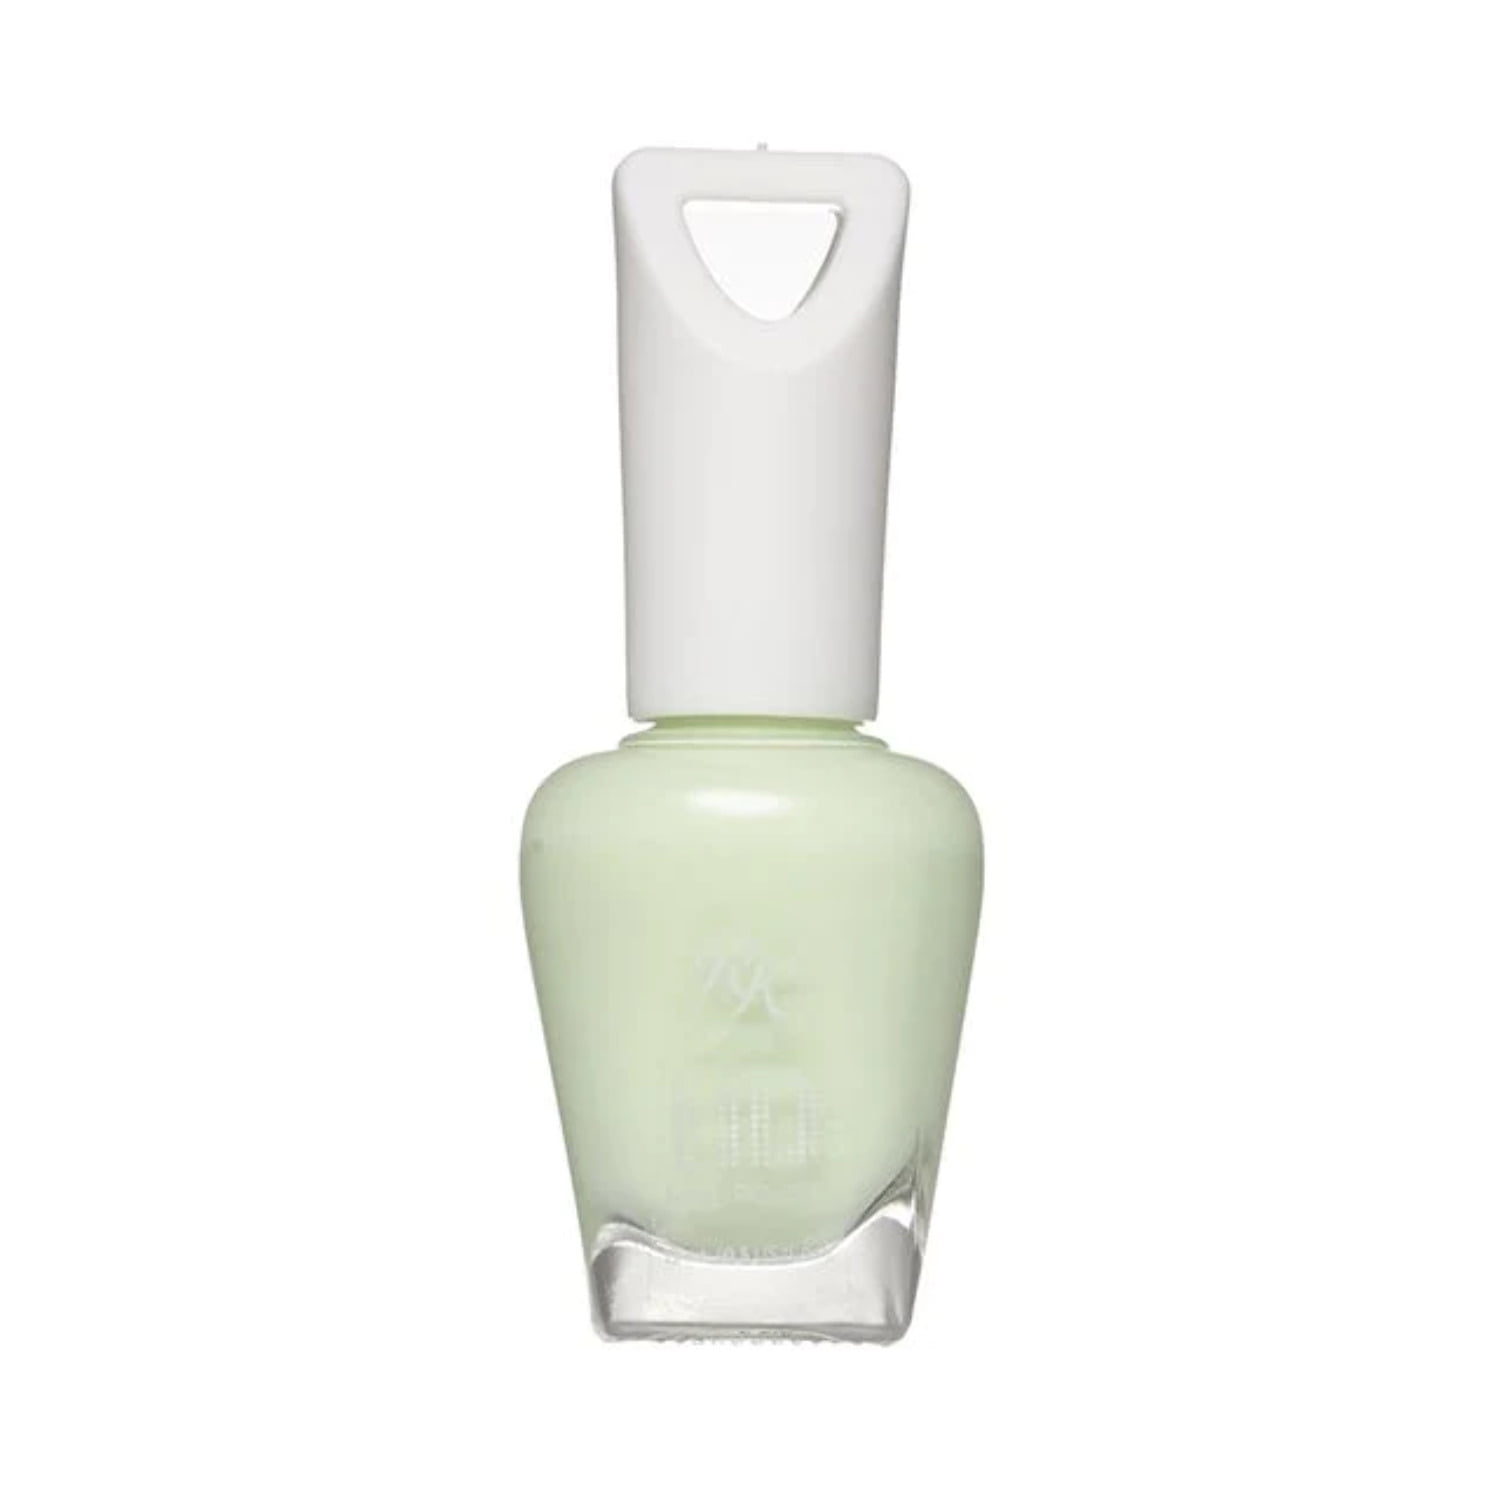 HD Nail Polish Multicolor - Price in India, Buy HD Nail Polish Multicolor  Online In India, Reviews, Ratings & Features | Flipkart.com